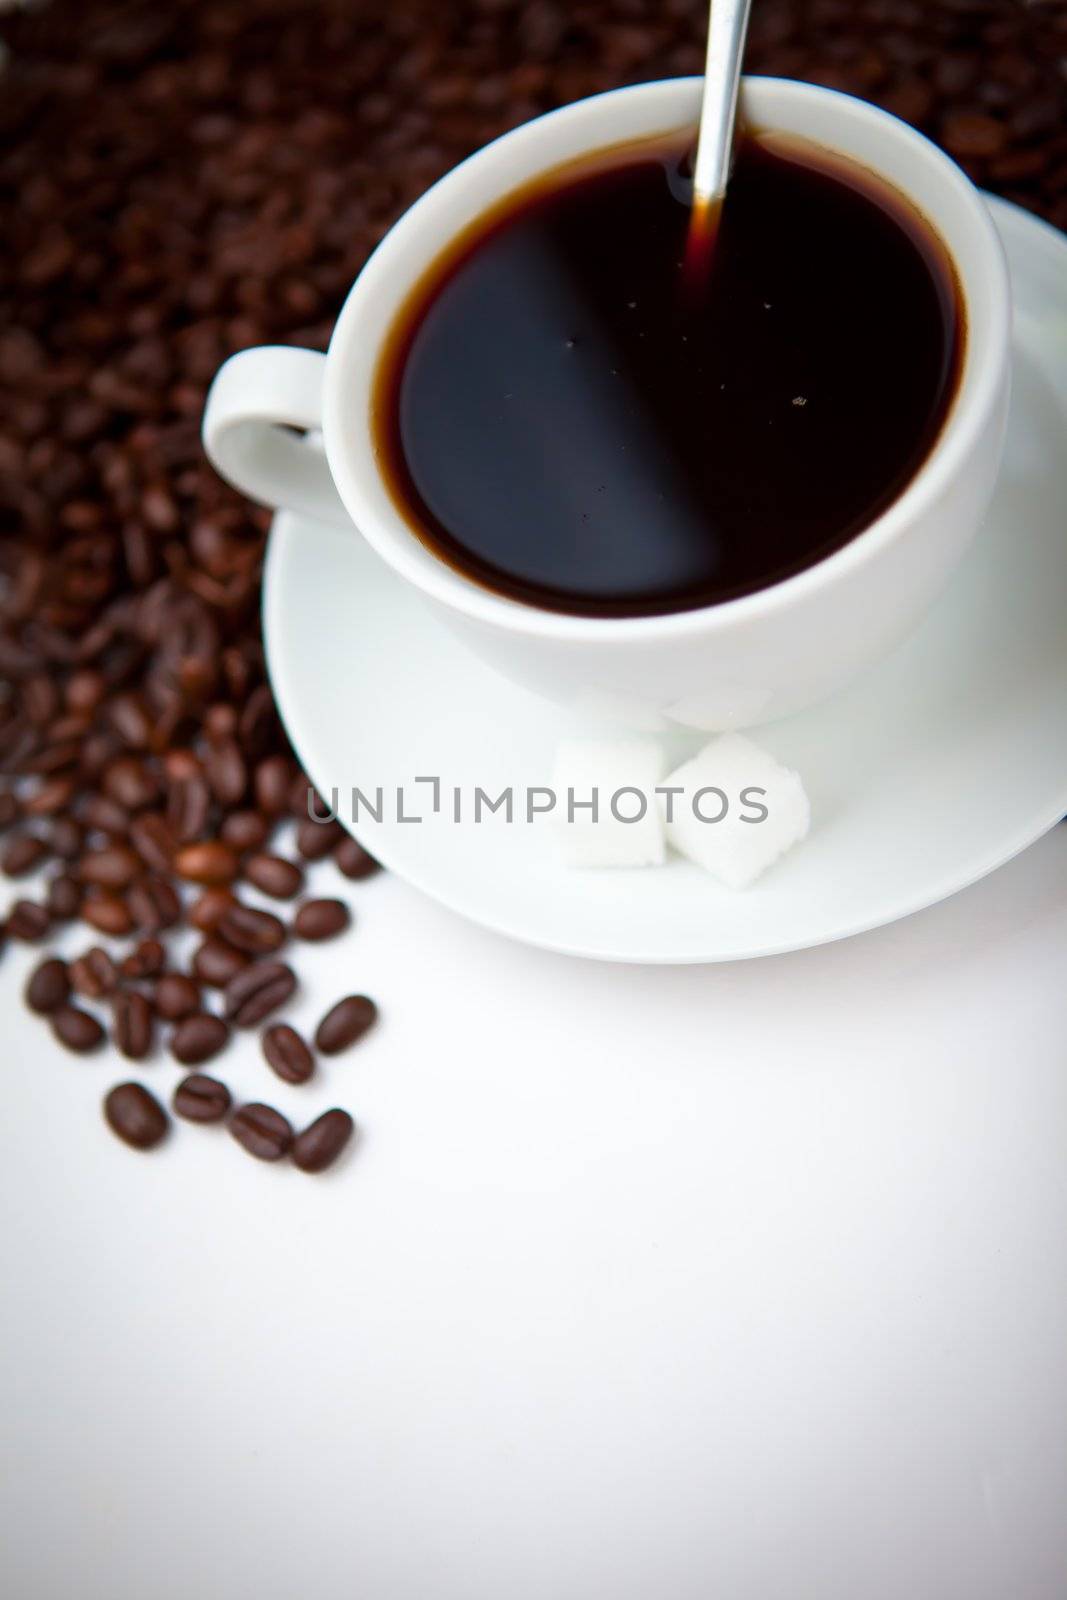 Black coffee with beans against a white background